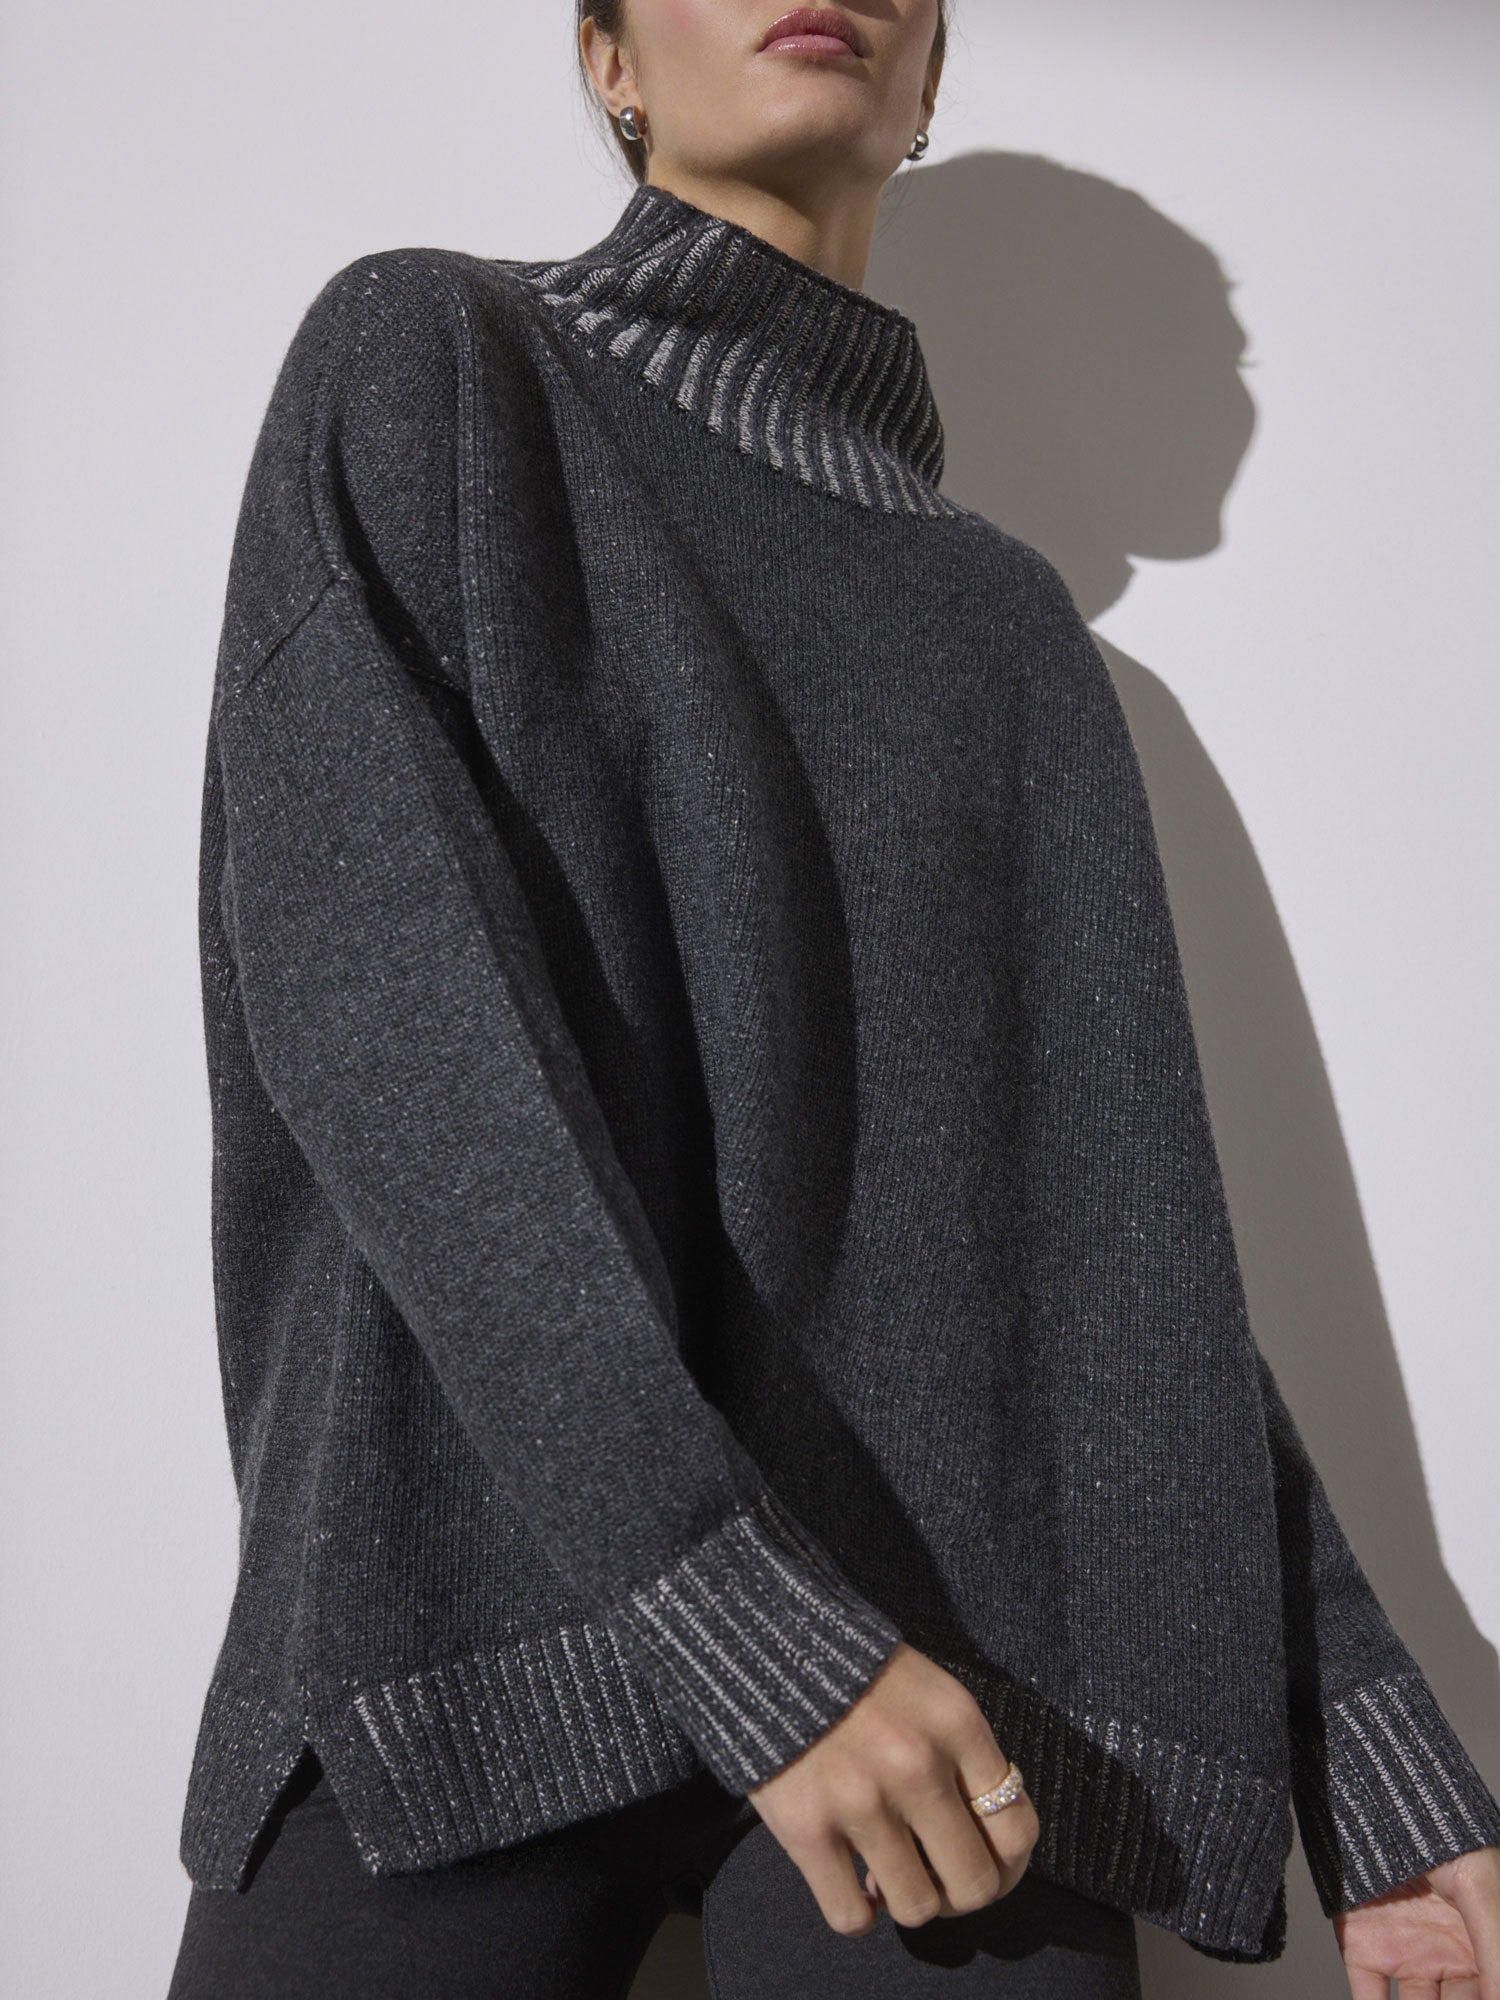 Ana gray turtleneck sweater front view 2